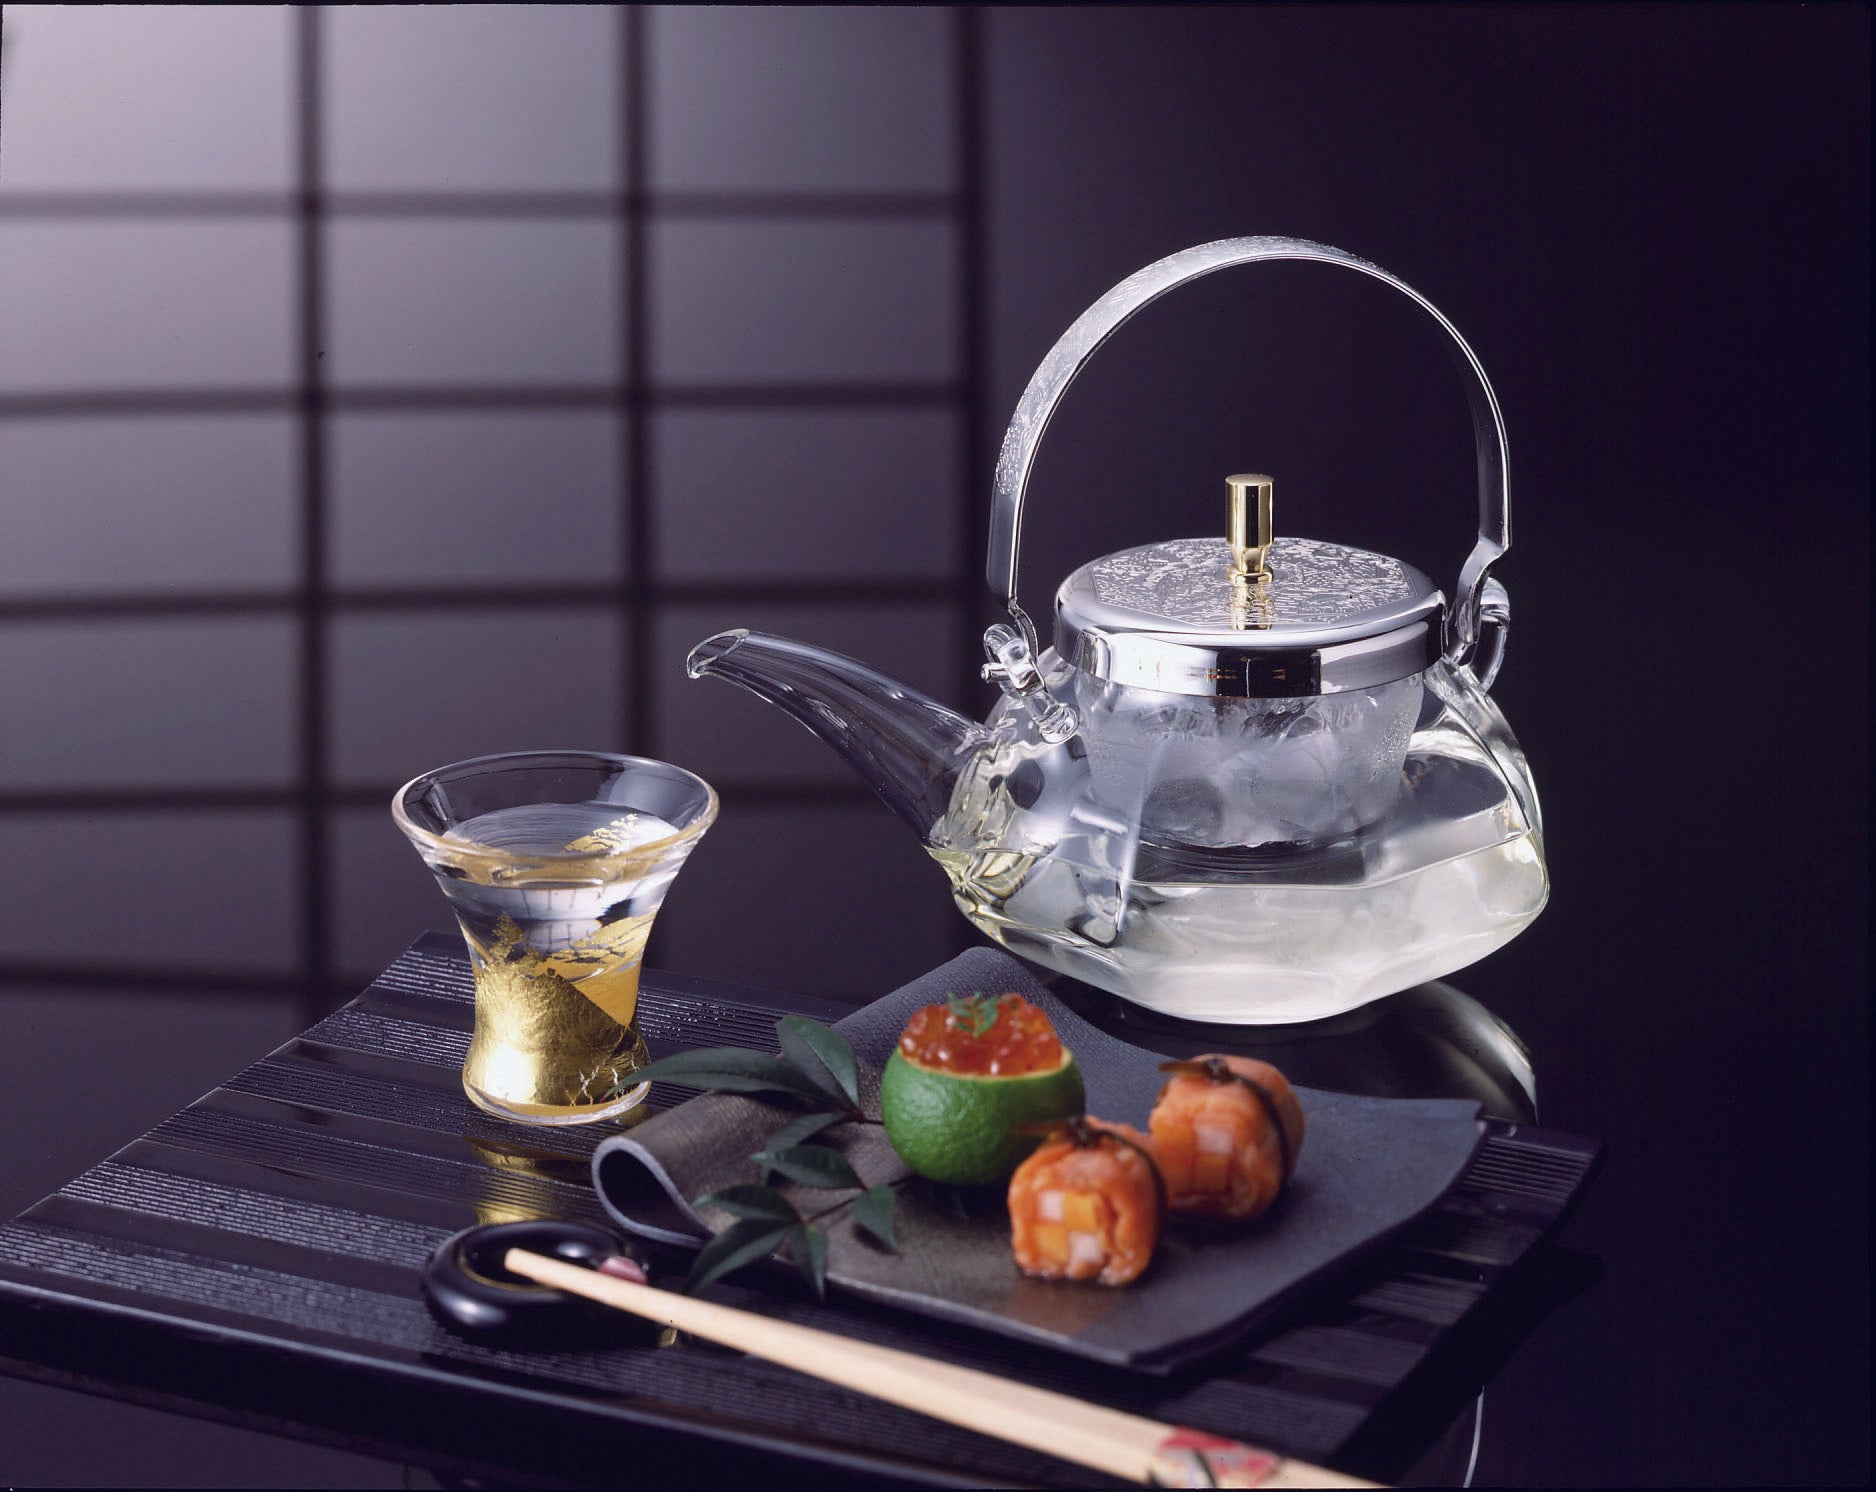 Elegant glass sake teapot with glass insert and metal lid and handle with decorative engraving set on a black reflective table with sushi and holding ice in its filter and sake in the pot. Tapered sake glass with gold trimmings and sake inside.